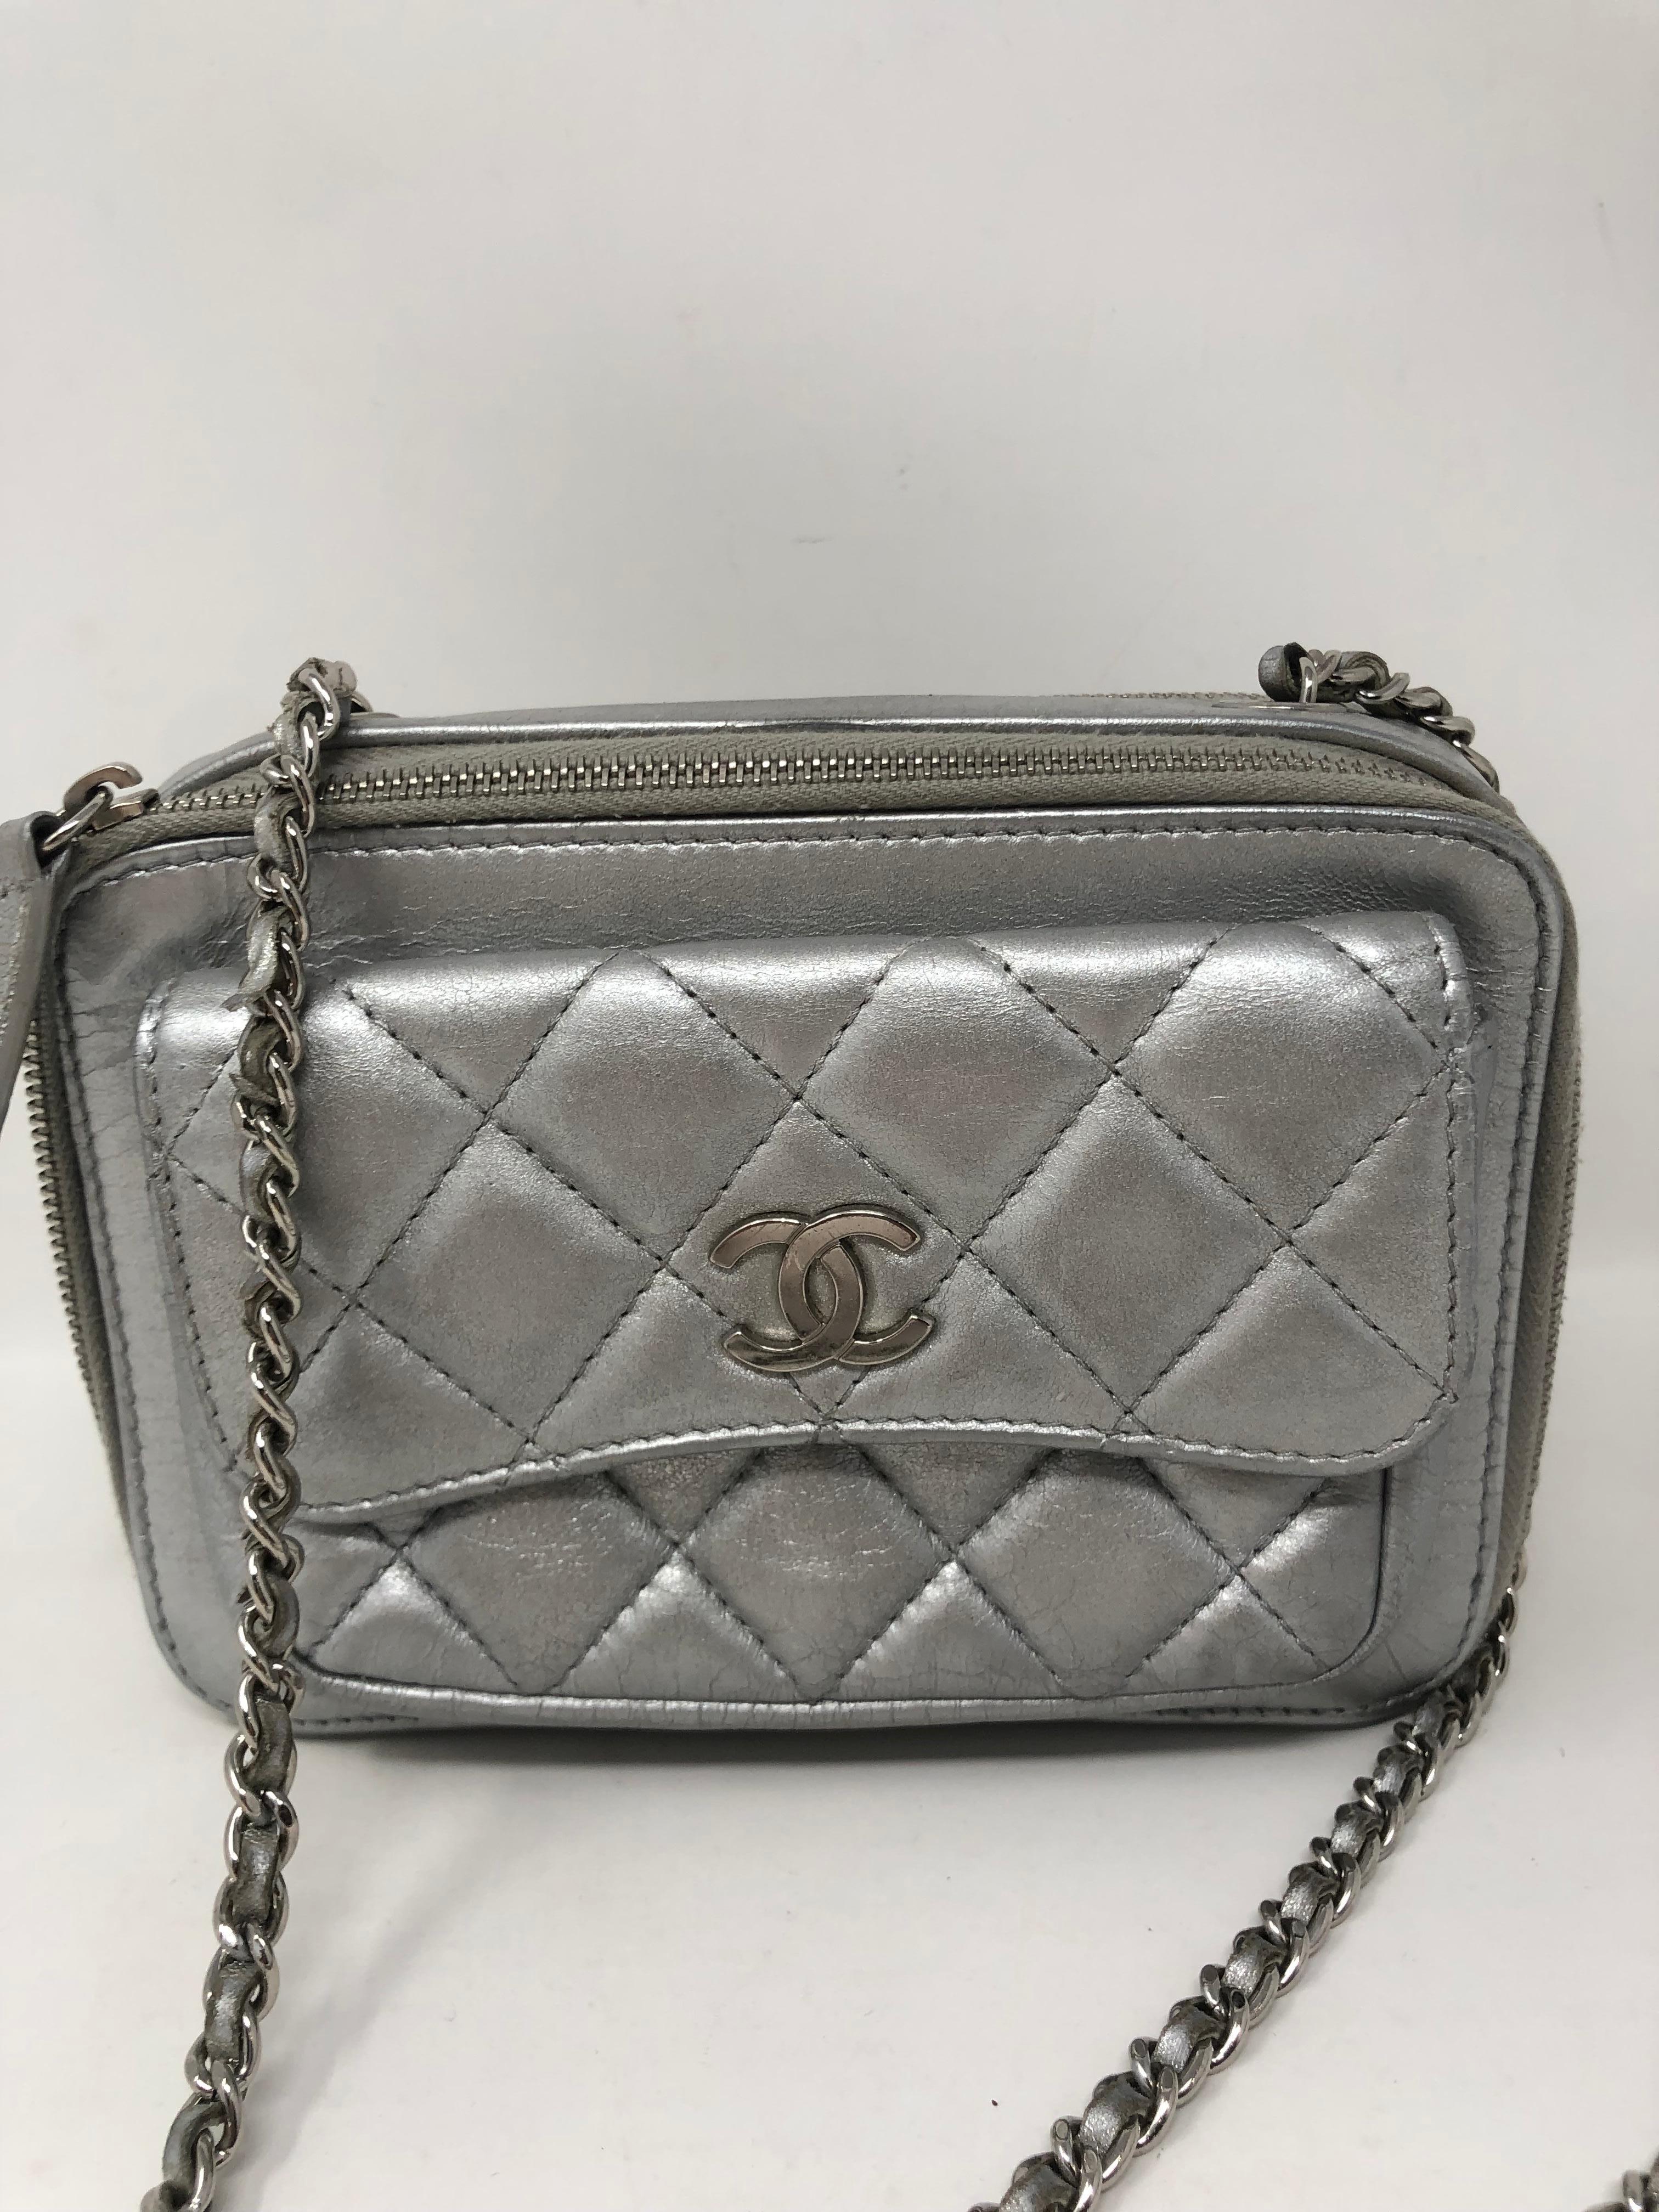 Chanel Silver Metallic Crossbody Camera Bag. Good condition. Light wear. Silver leather with silver chain. Guaranteed authentic. 